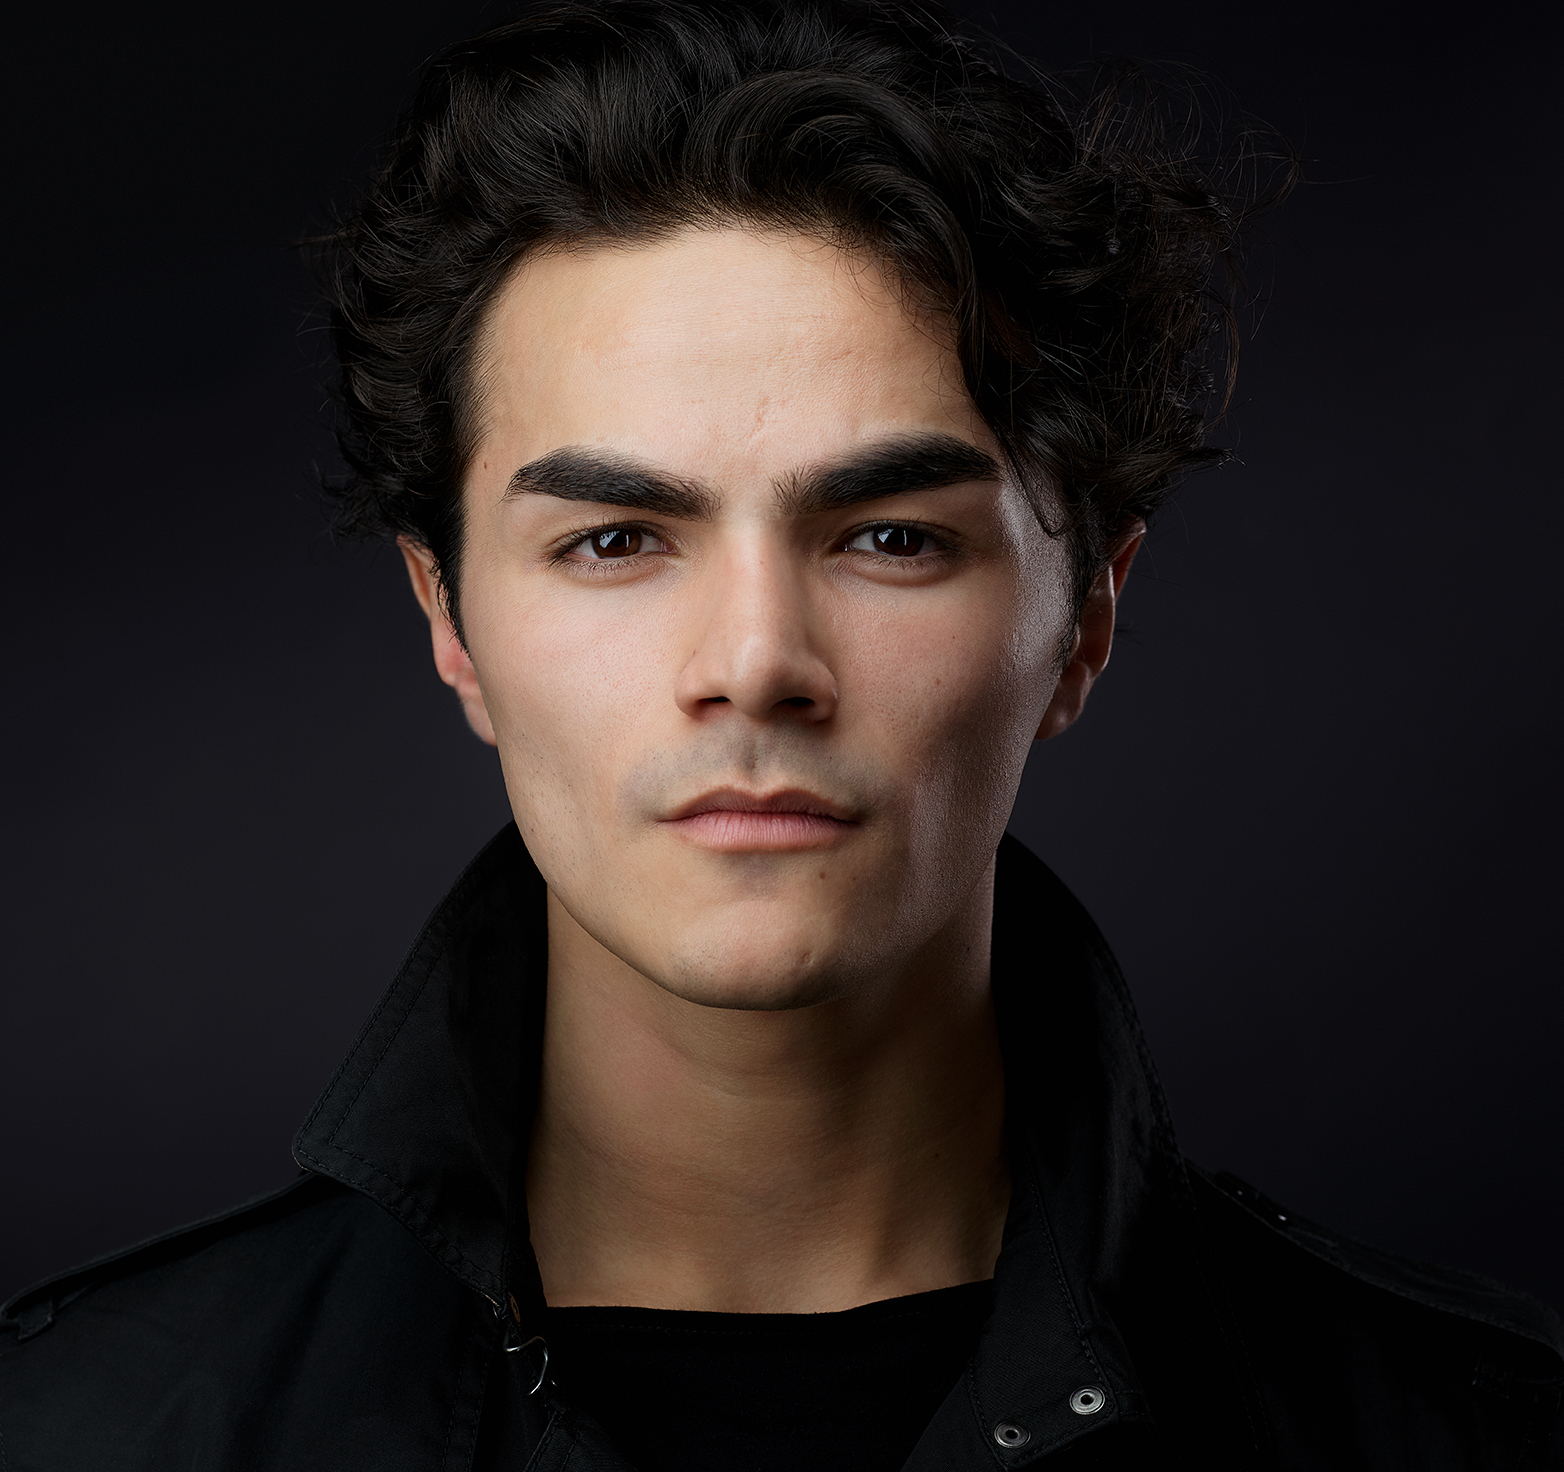 Headshots - Back in Black - Peter Hurley Photography